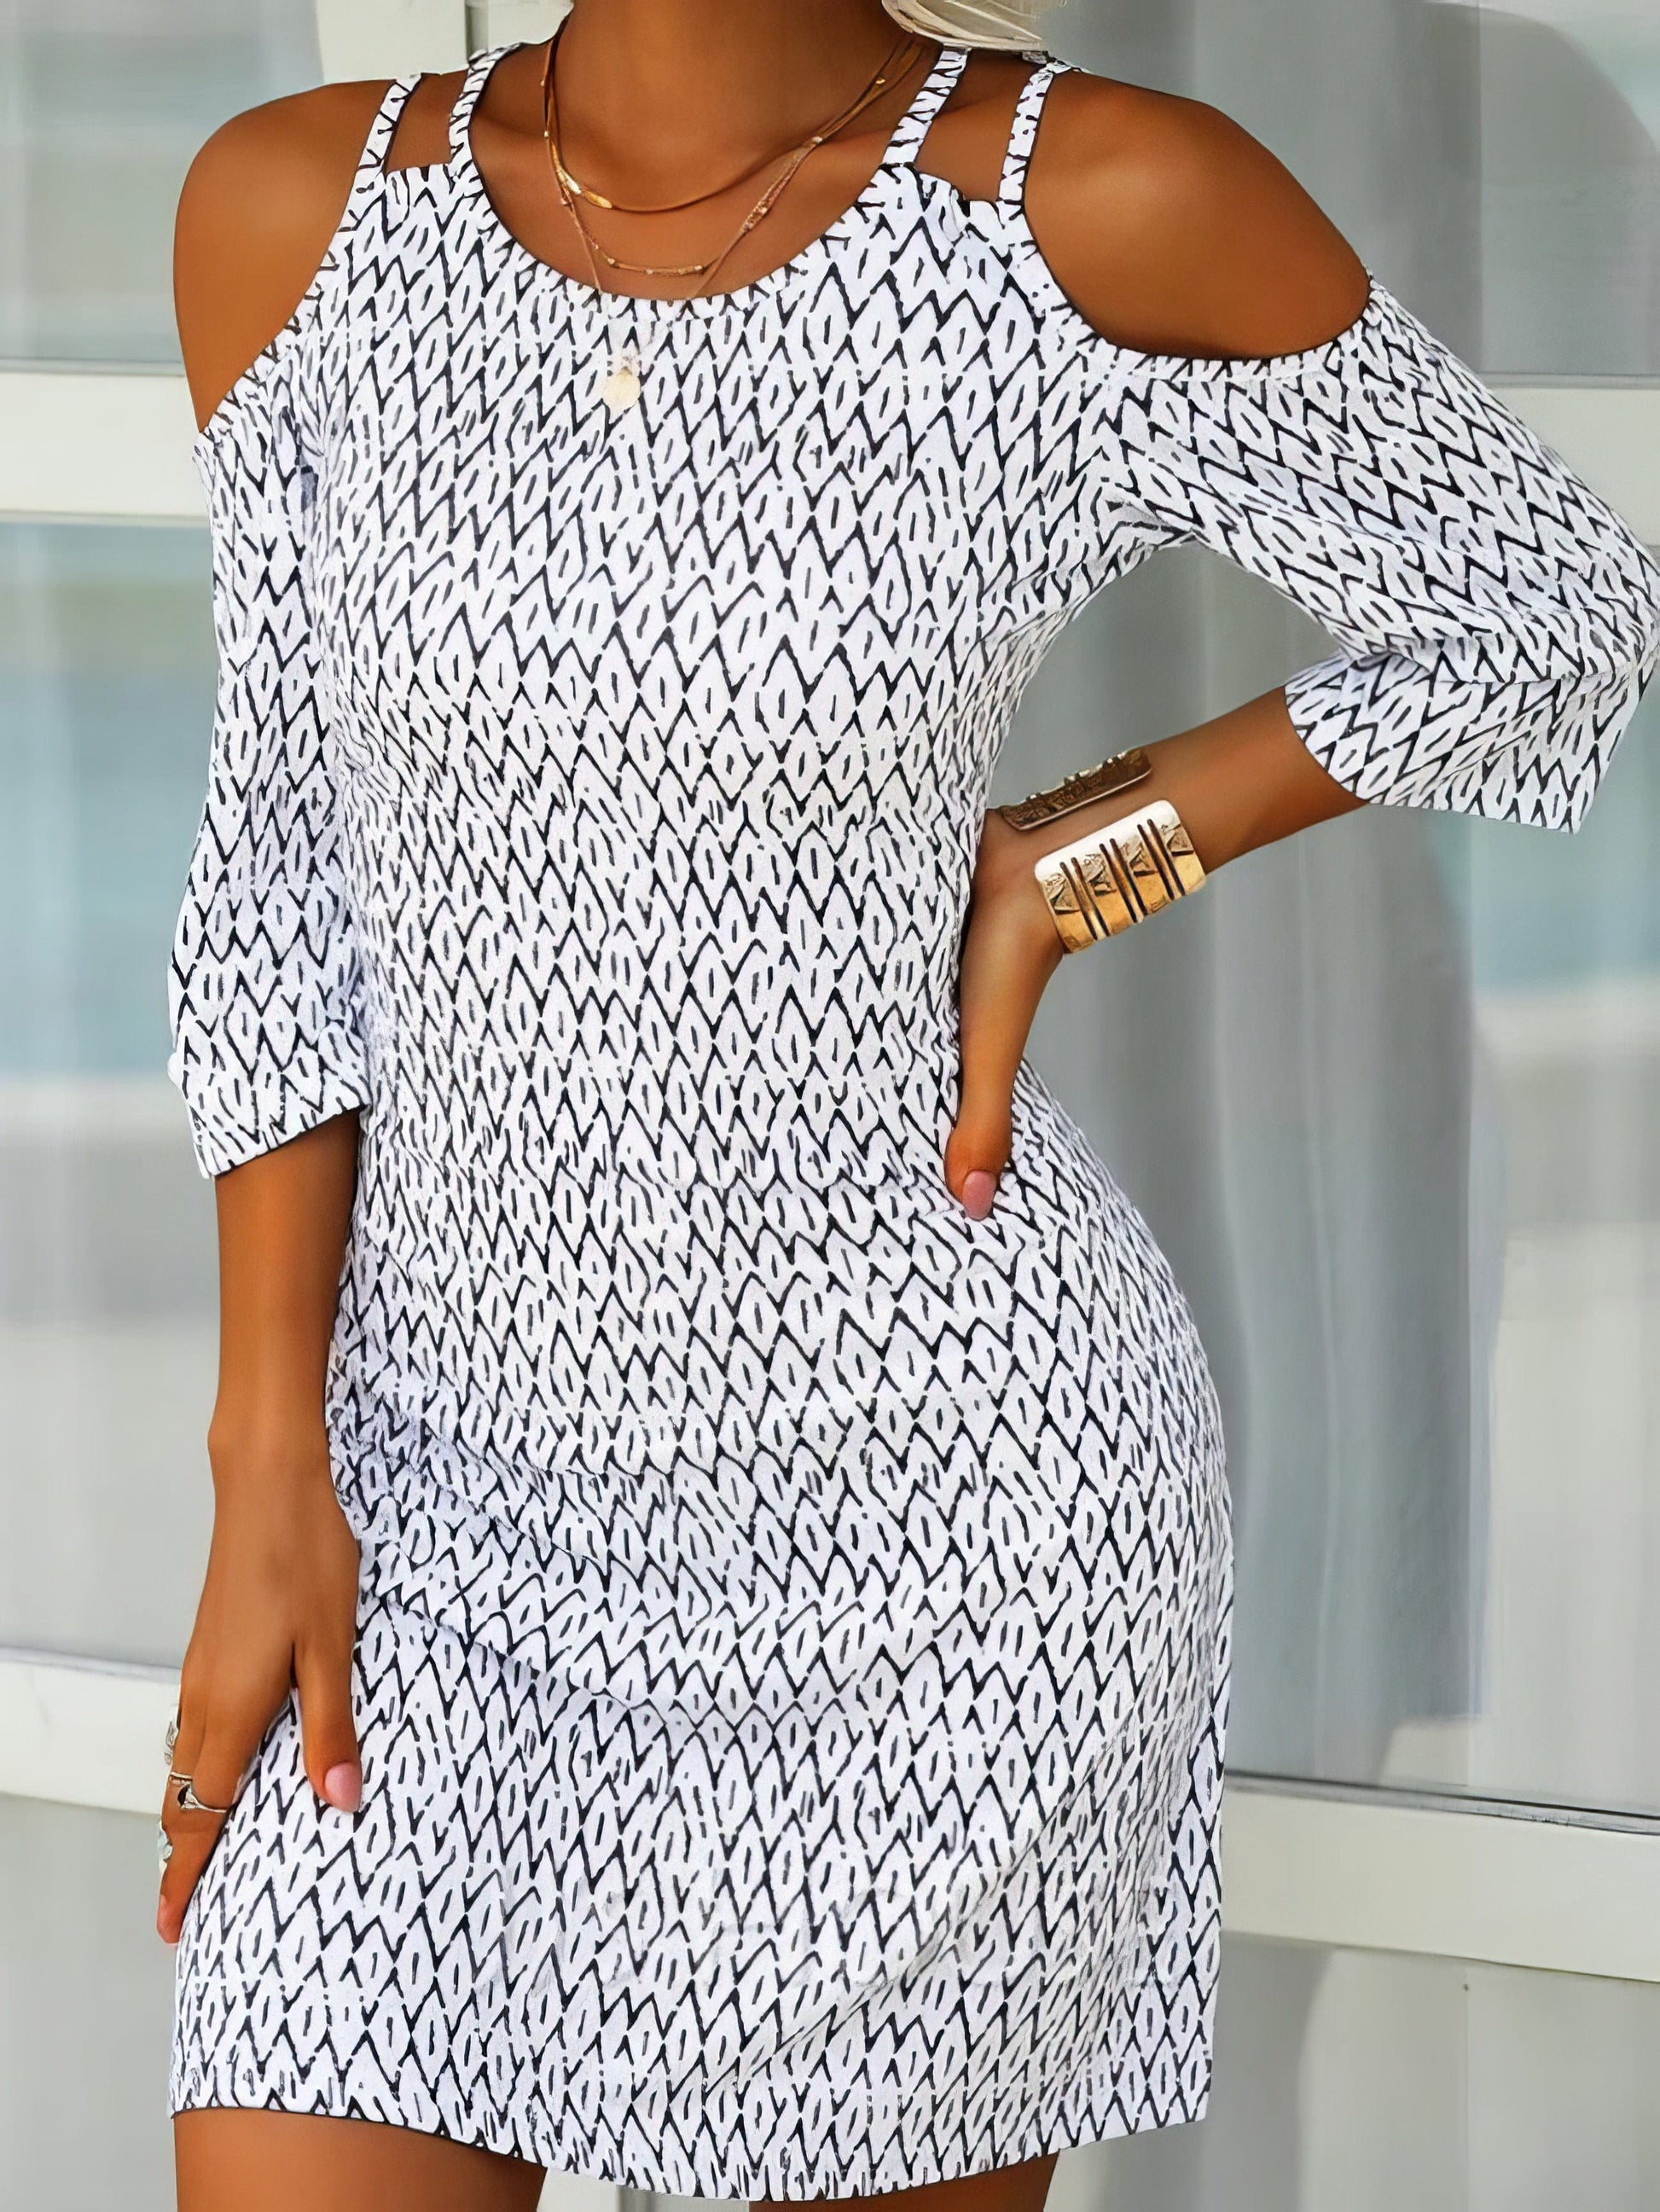 MsDressly Mini Dresses Printed Mid-Sleeve Off The Shoulder Dress DRE2107011487WHIS